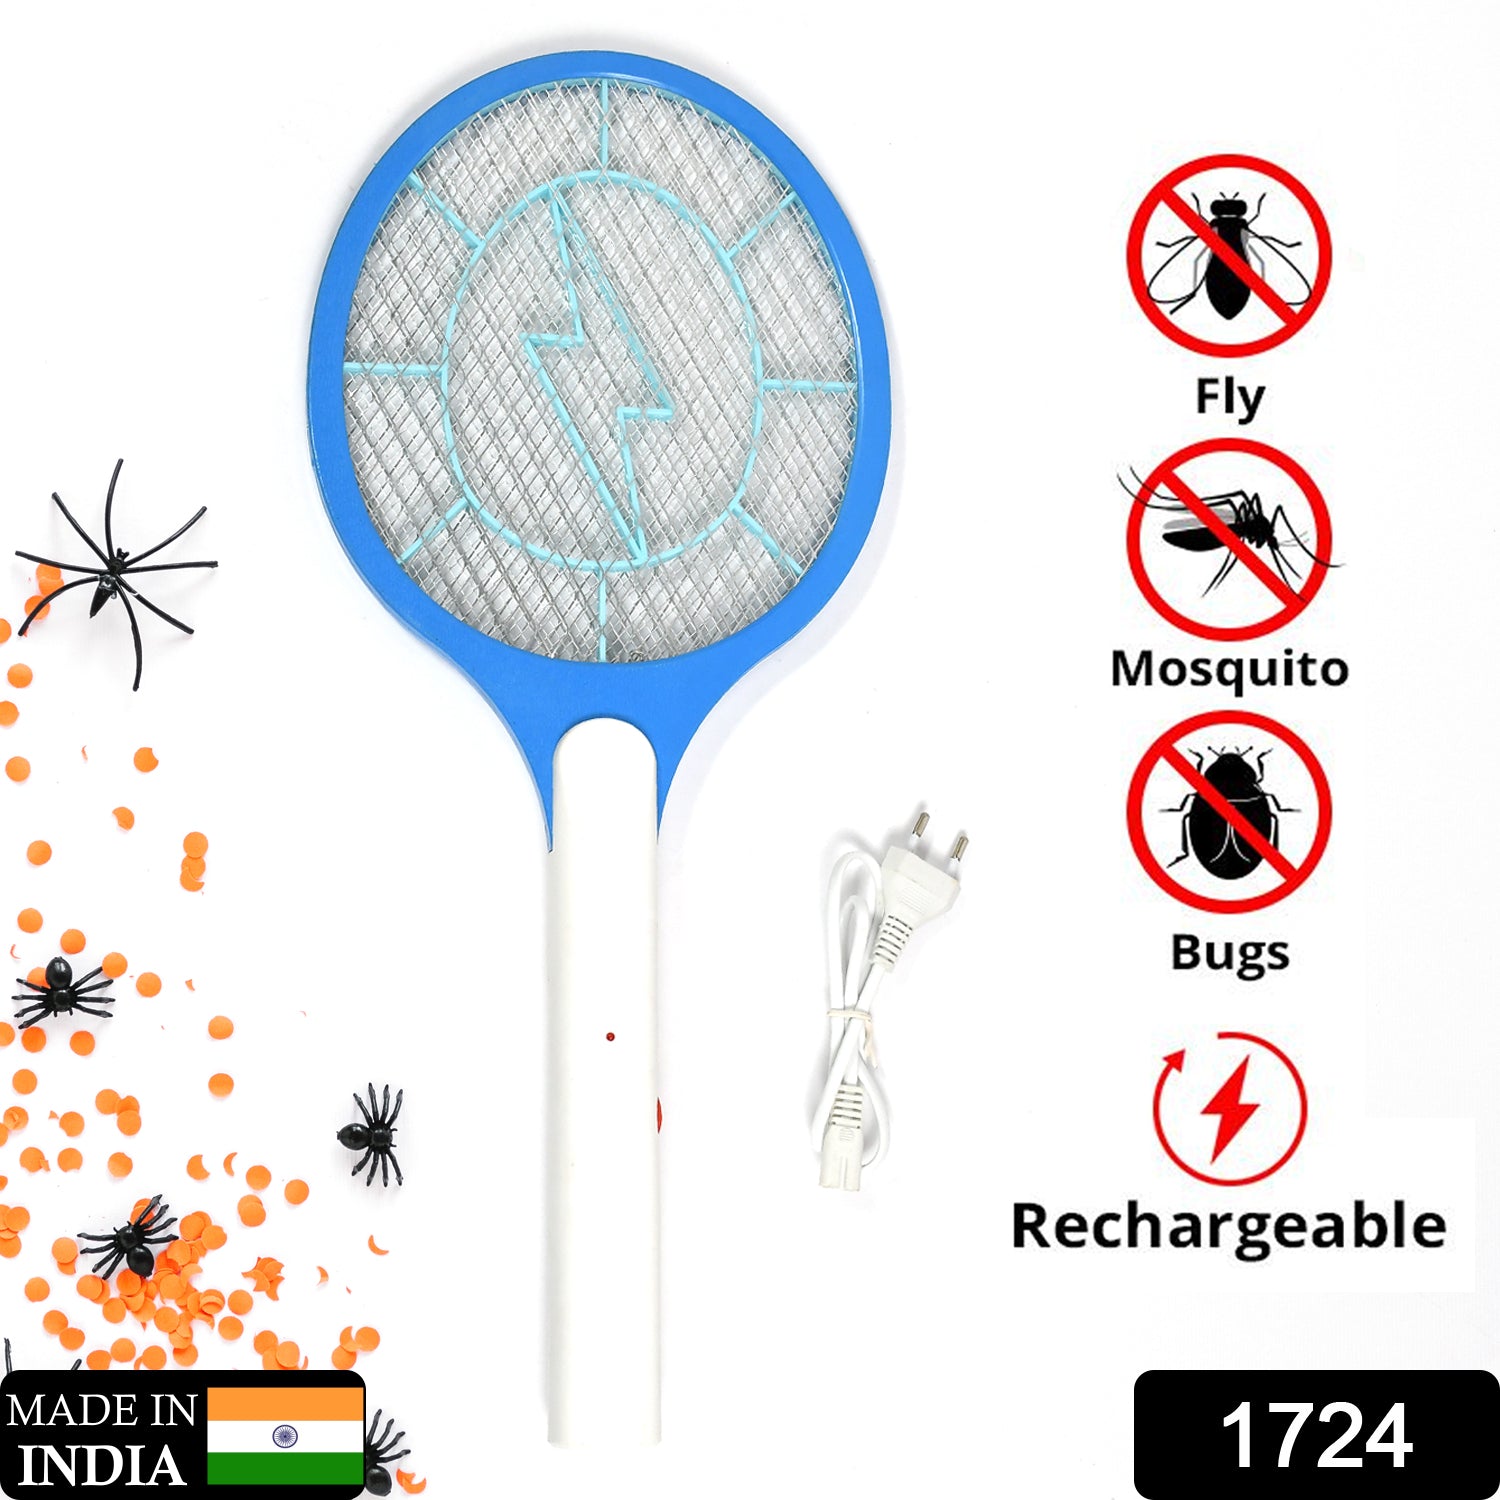 1724 Mosquito Killer Racket Rechargeable Handheld Electric Fly Swatter Mosquito Killer Racket Bat, Electric Insect Killer (Quality Assured) DeoDap